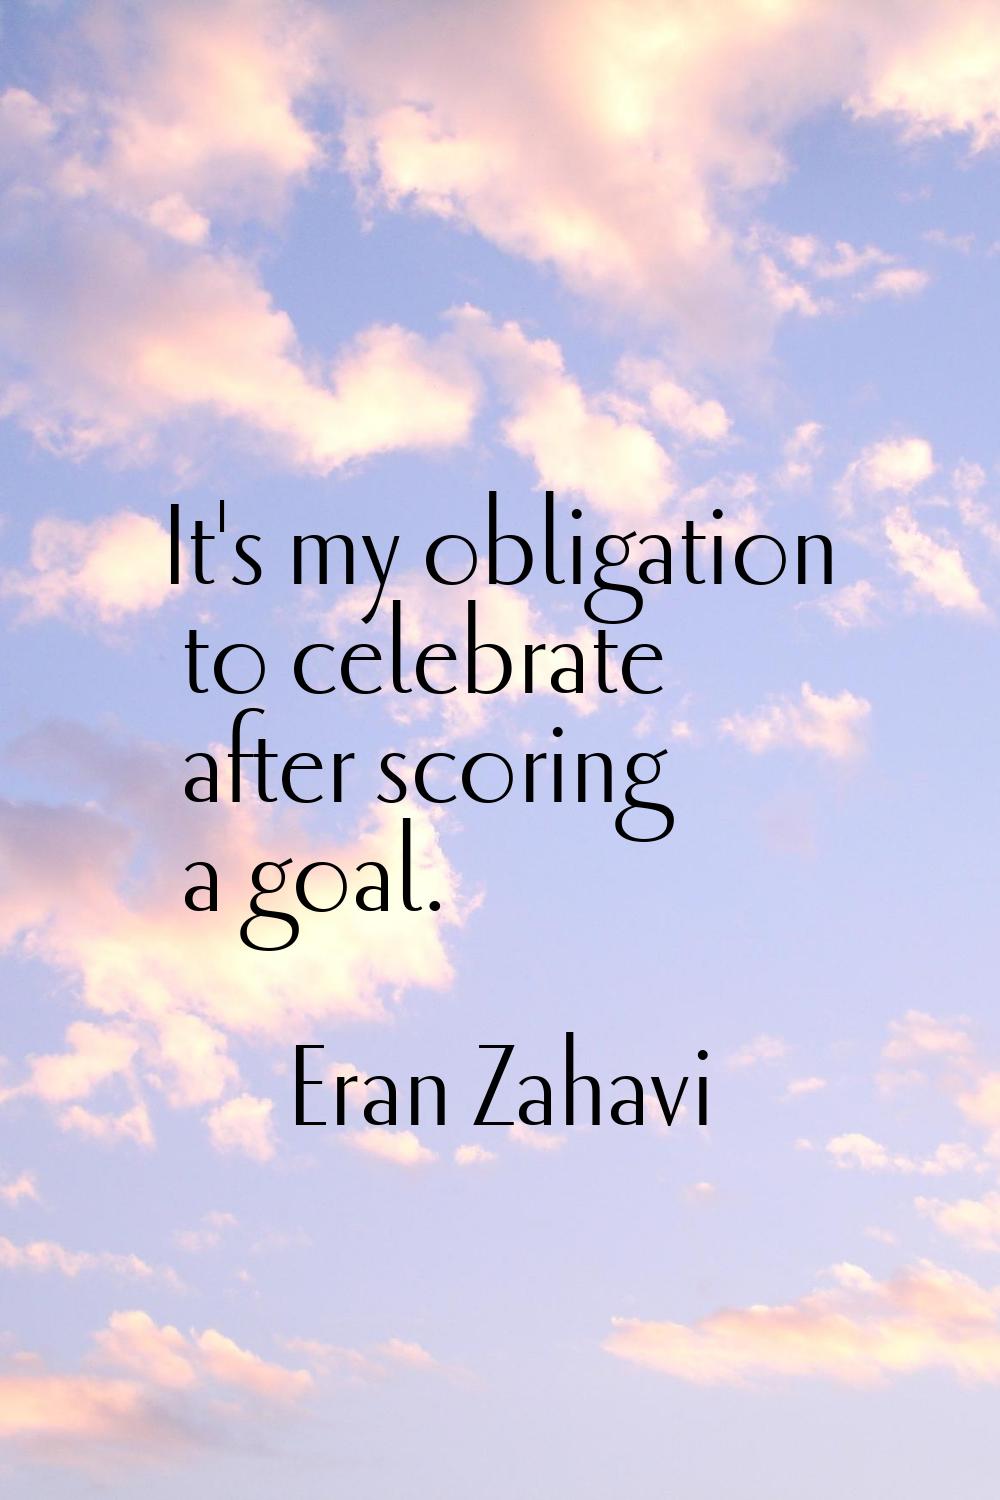 It's my obligation to celebrate after scoring a goal.